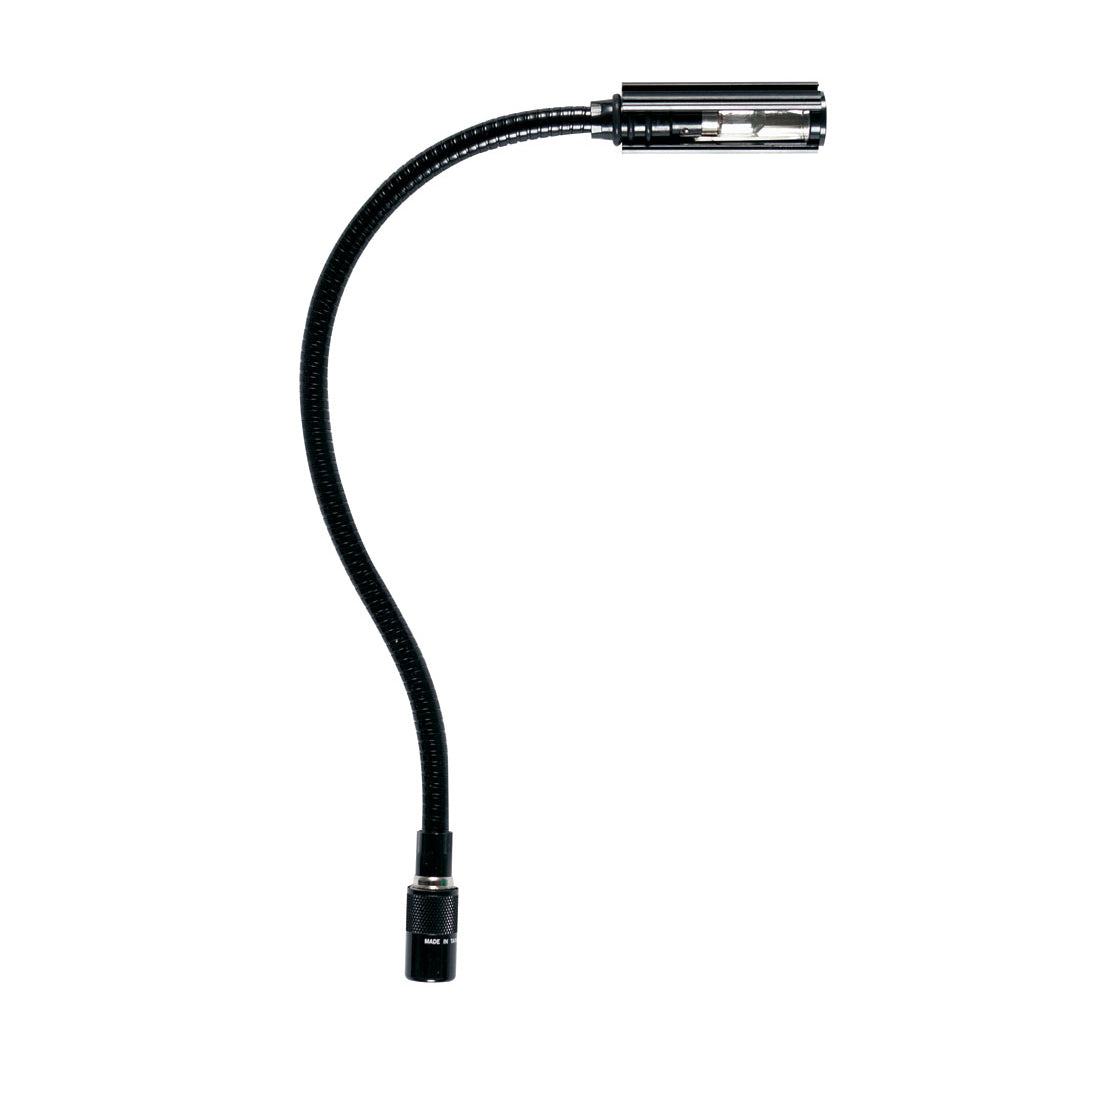 CITRONIC 12v Console Lamp with XLR Connector (173096)